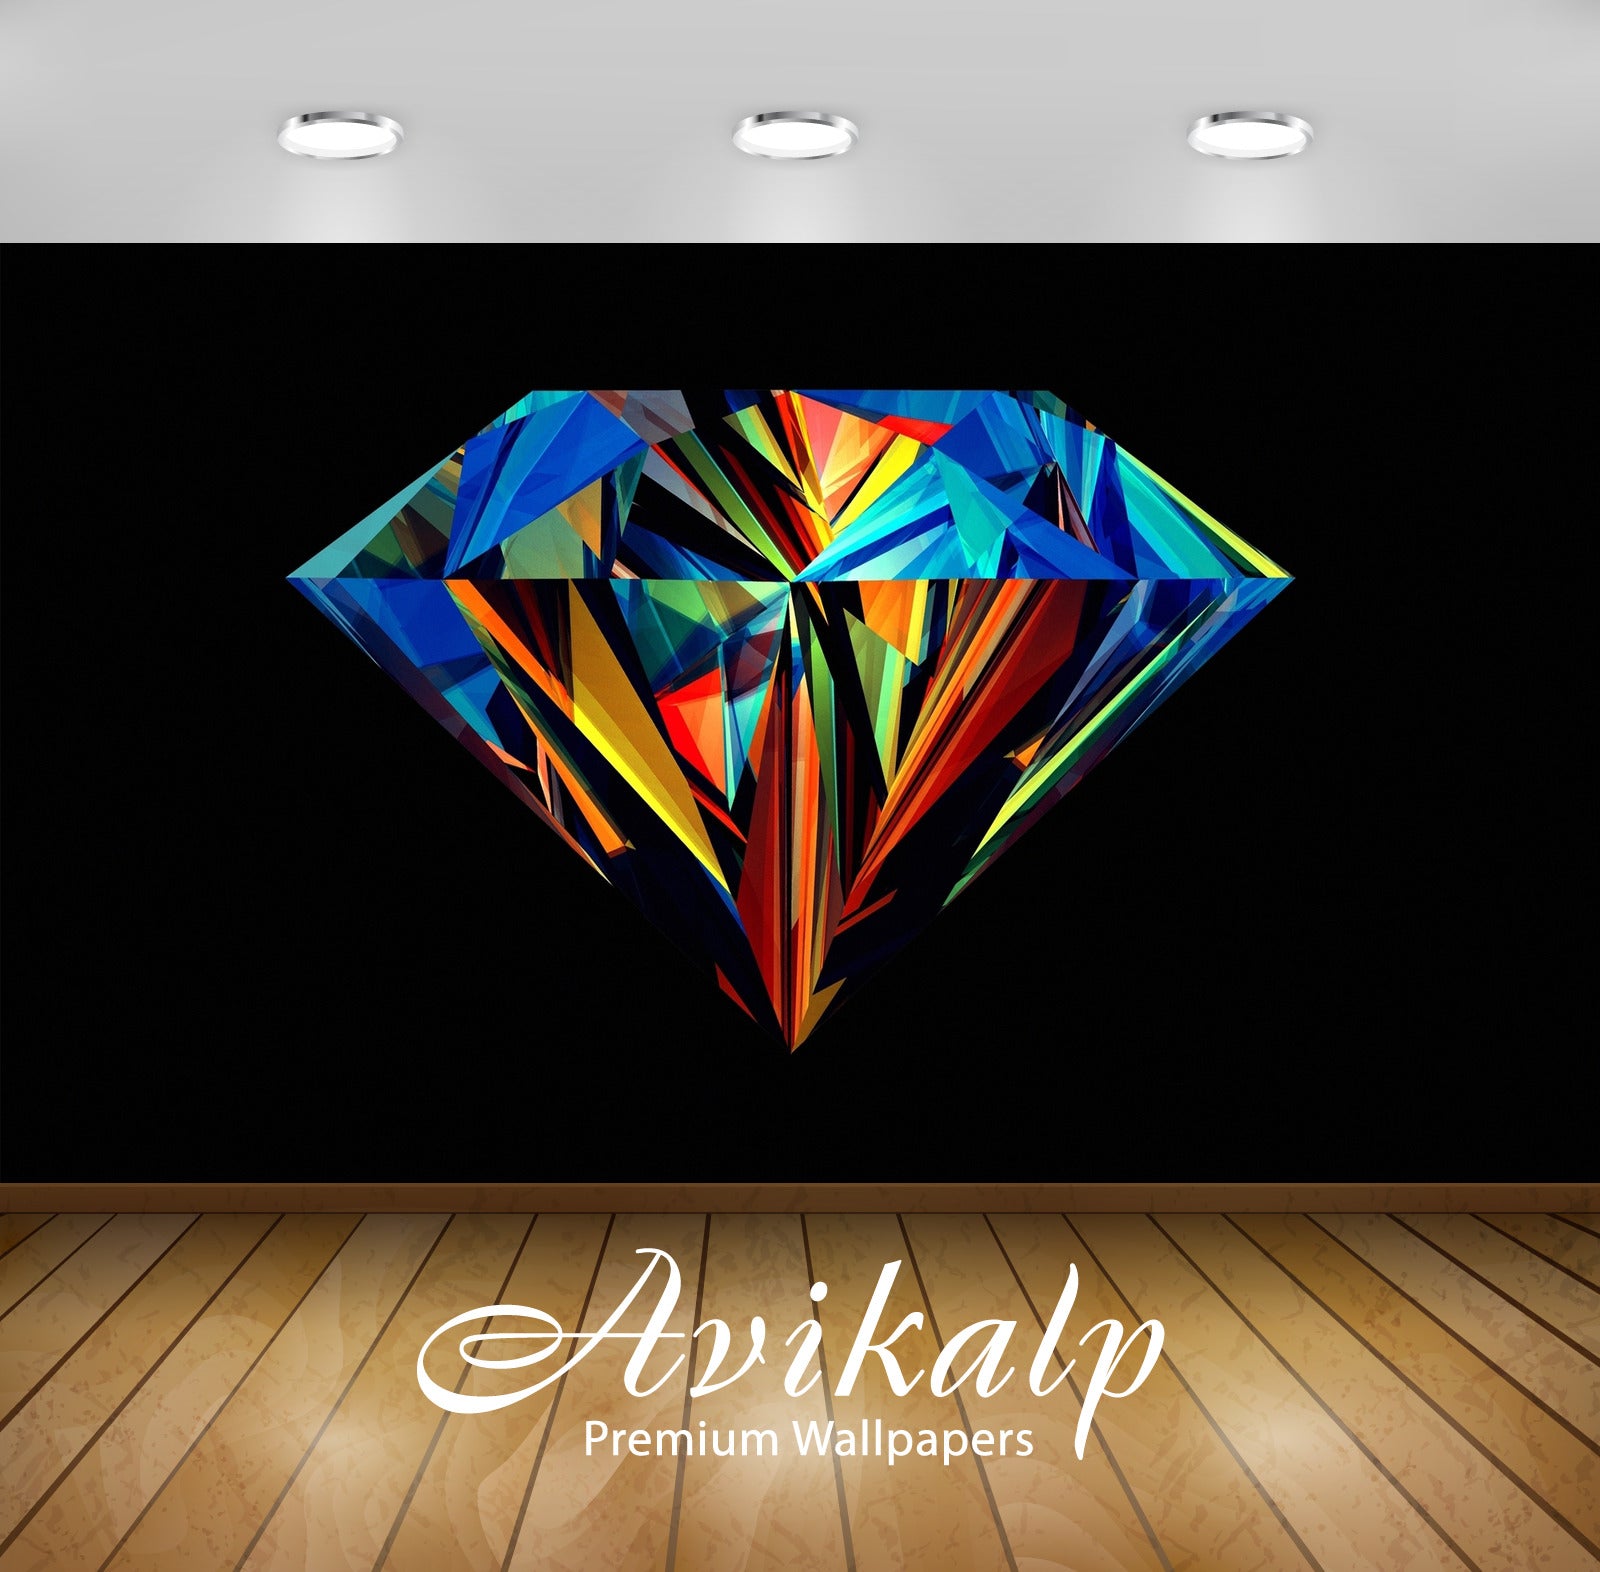 Avikalp Exclusive Awi4177 Colorful Perfect Diamond Full HD Wallpapers for Living room, Hall, Kids Ro